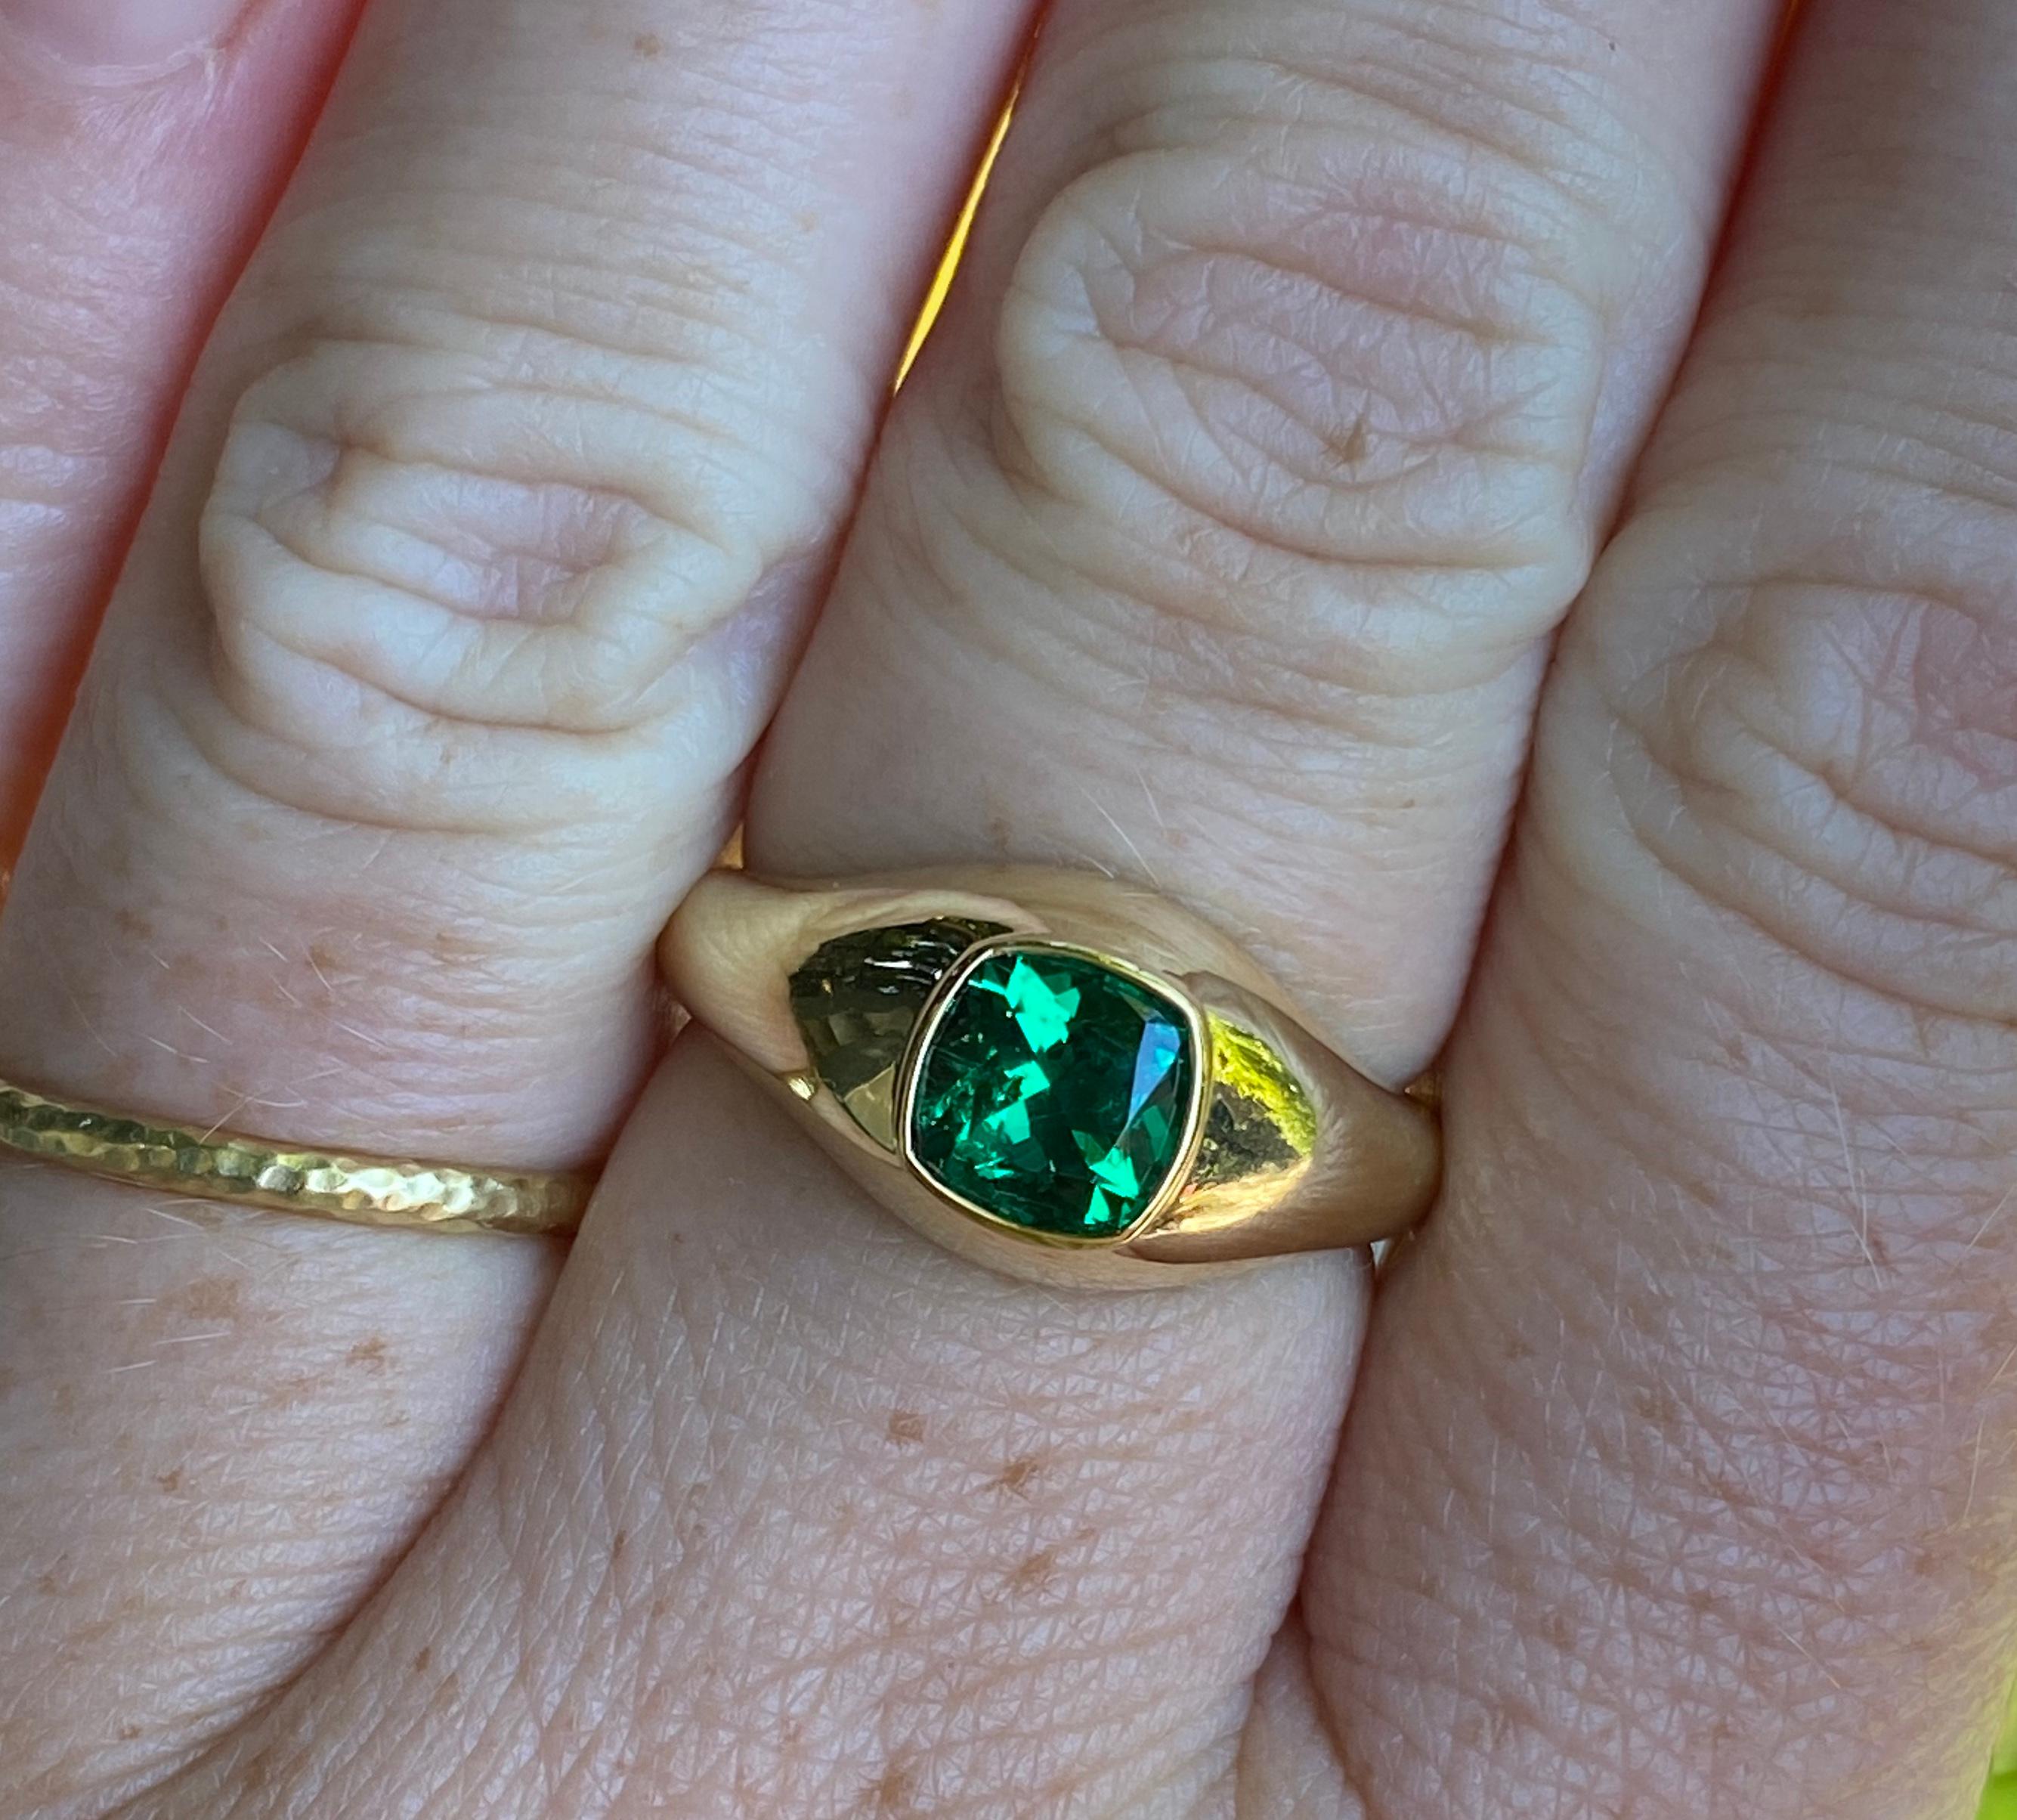 This ring features a gem quality 1.07 alpine green Colombian emerald that is certified by AGL as having no treatment. It is set in our hand carved wax/cast signet of 18 karat recycled gold by our master goldsmith. His or hers. An investment